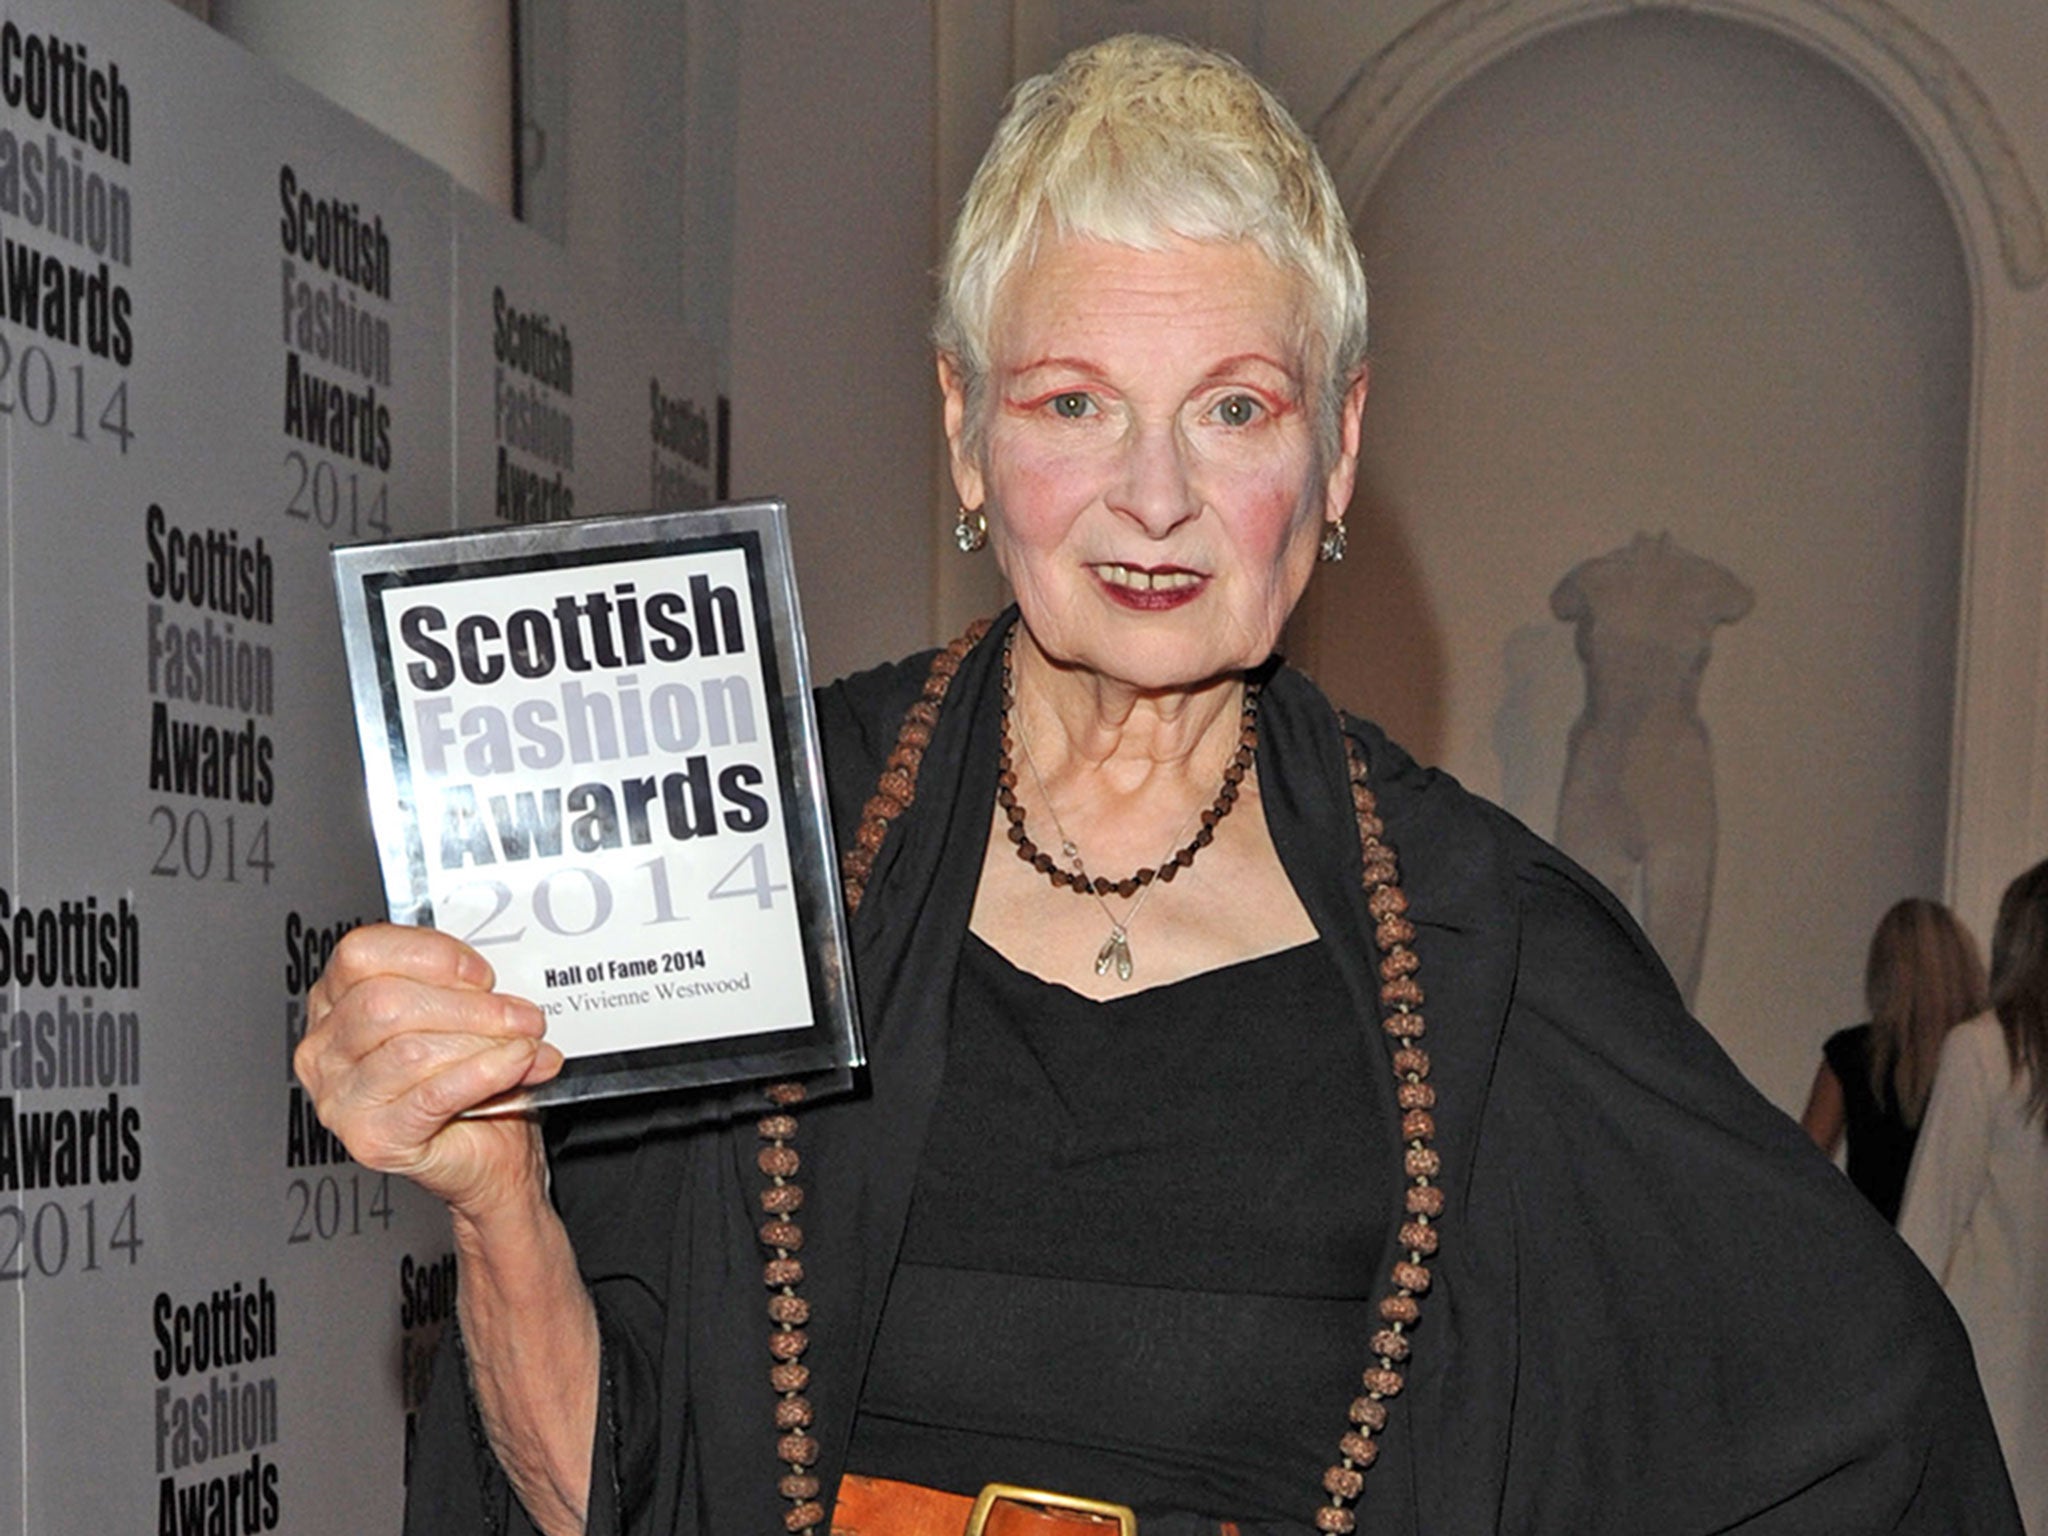 Scottish Fashion Awards: Queen of tartan Vivienne Westwood is crowned ...